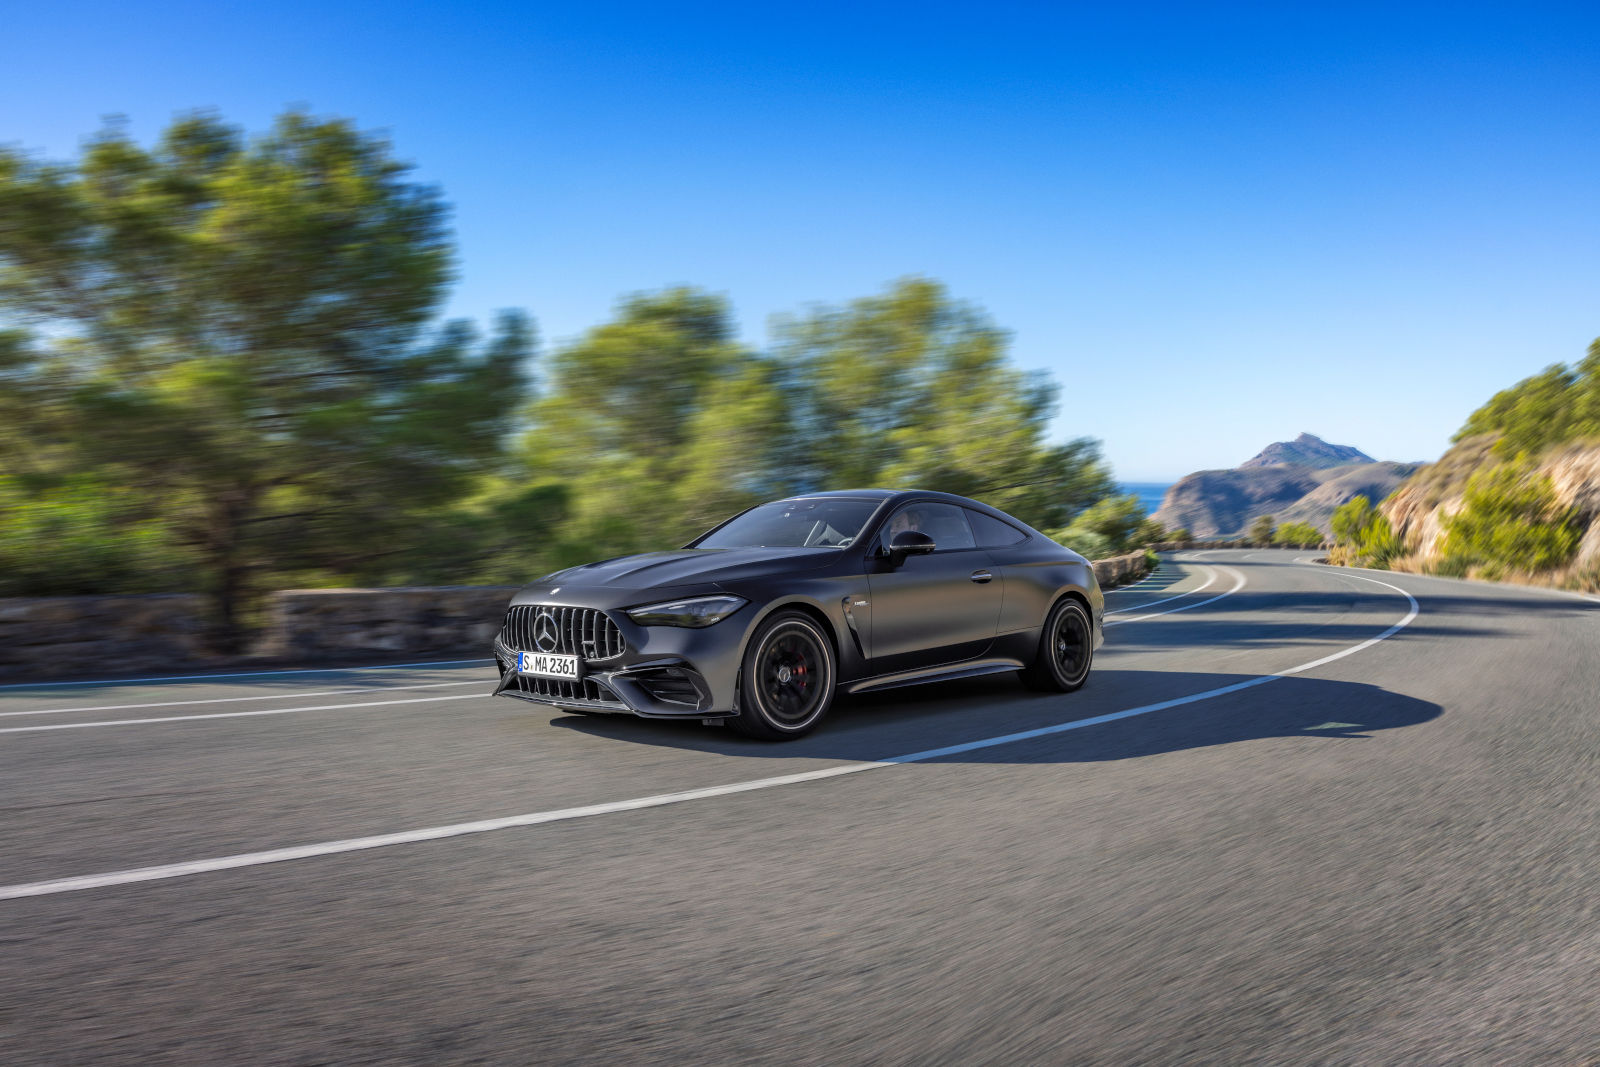 The new Mercedes-AMG CLE Coupe: A Fusion of Performance and Elegance